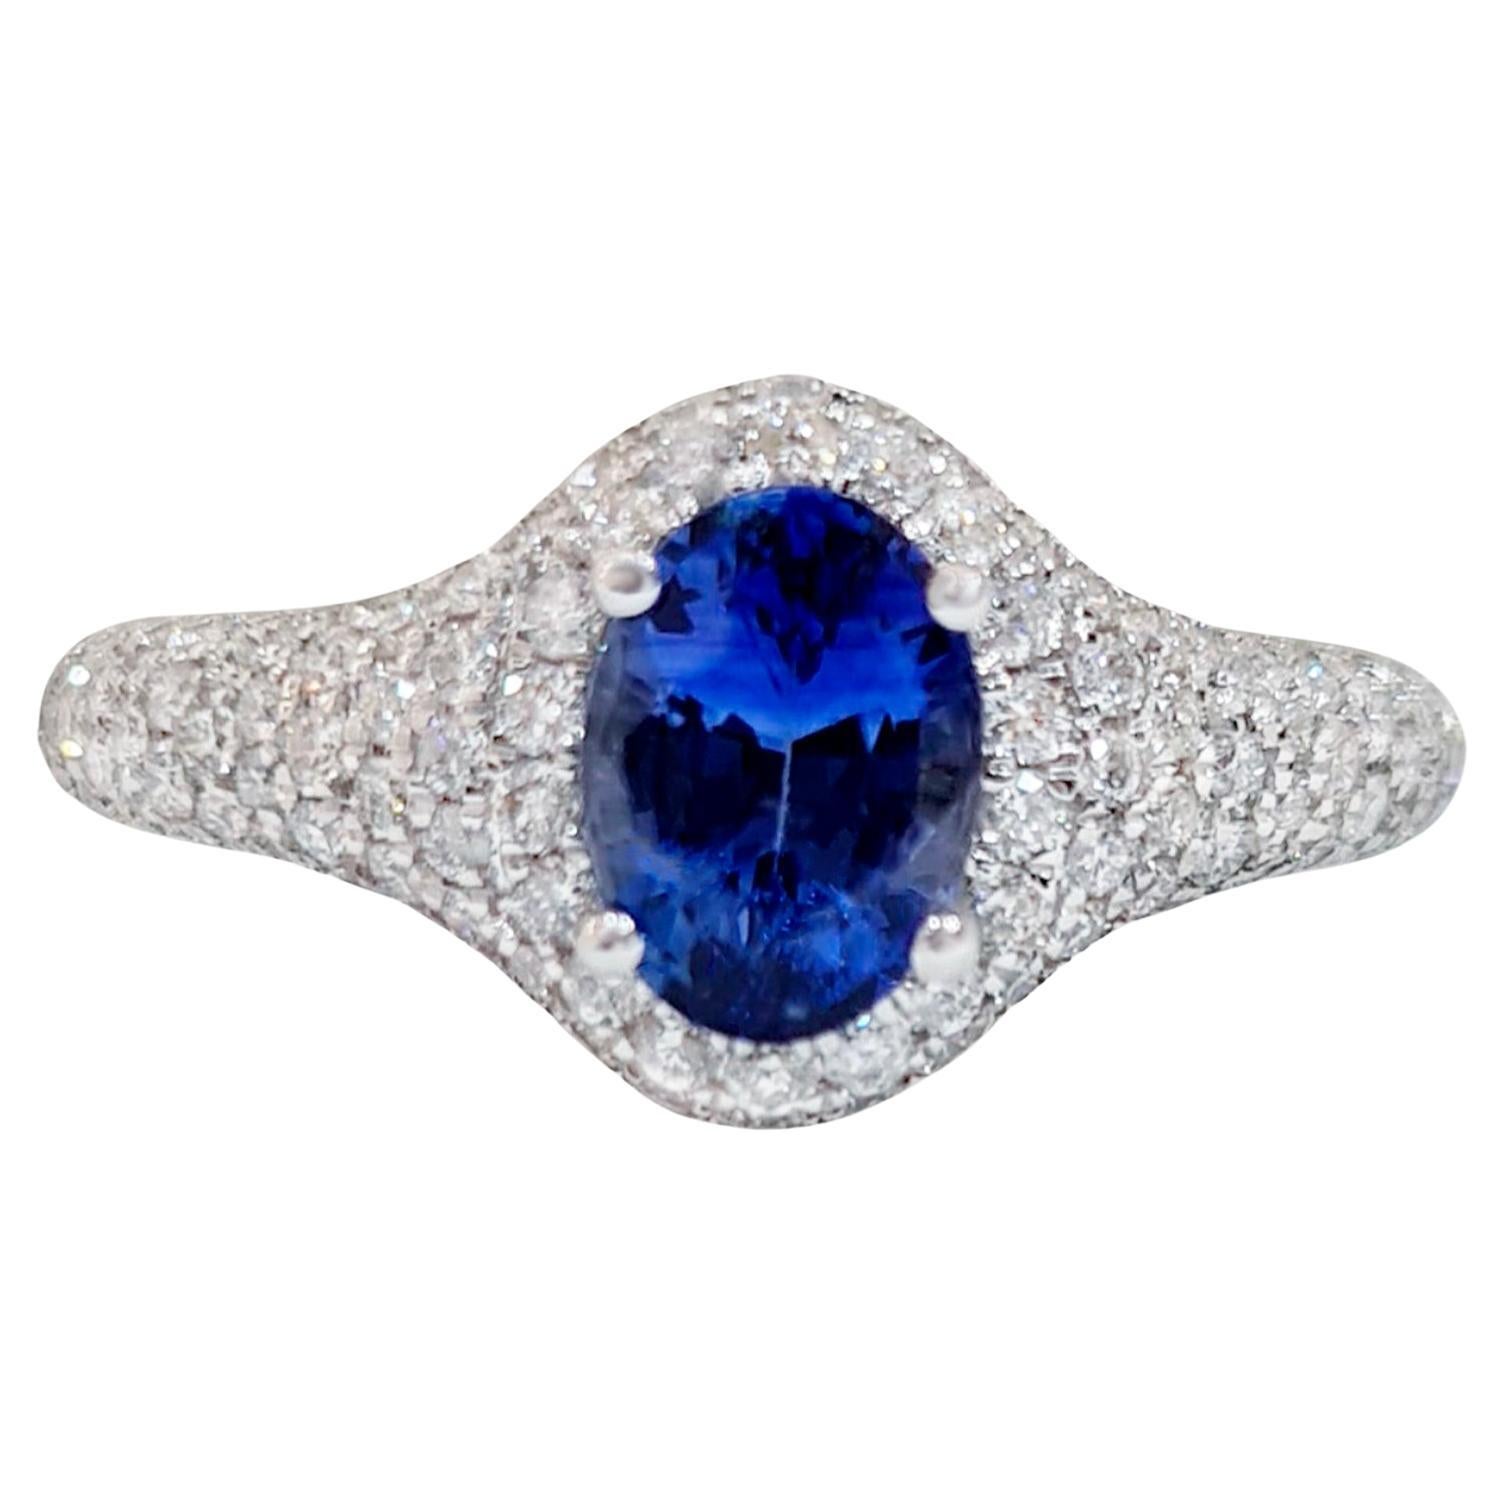 Blue Sapphire Ring With White Diamonds 1.83 Carats 18K White Gold For Sale